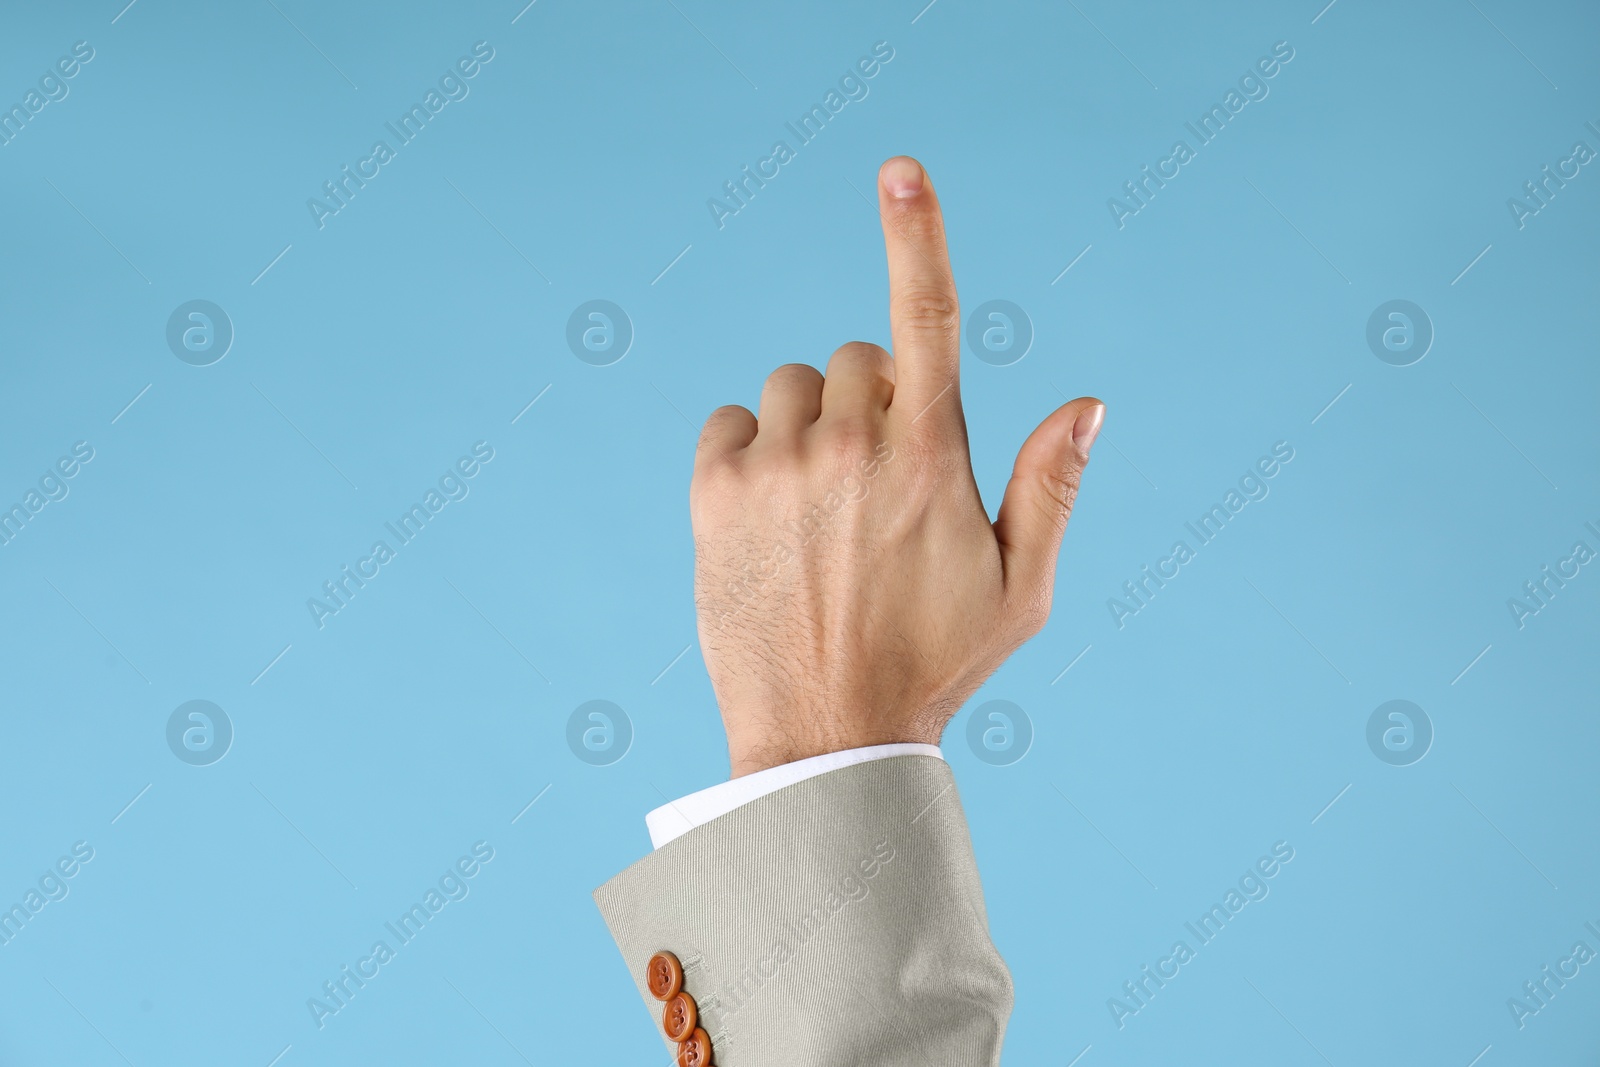 Photo of Businessman pointing at something on light blue background, closeup. Finger gesture